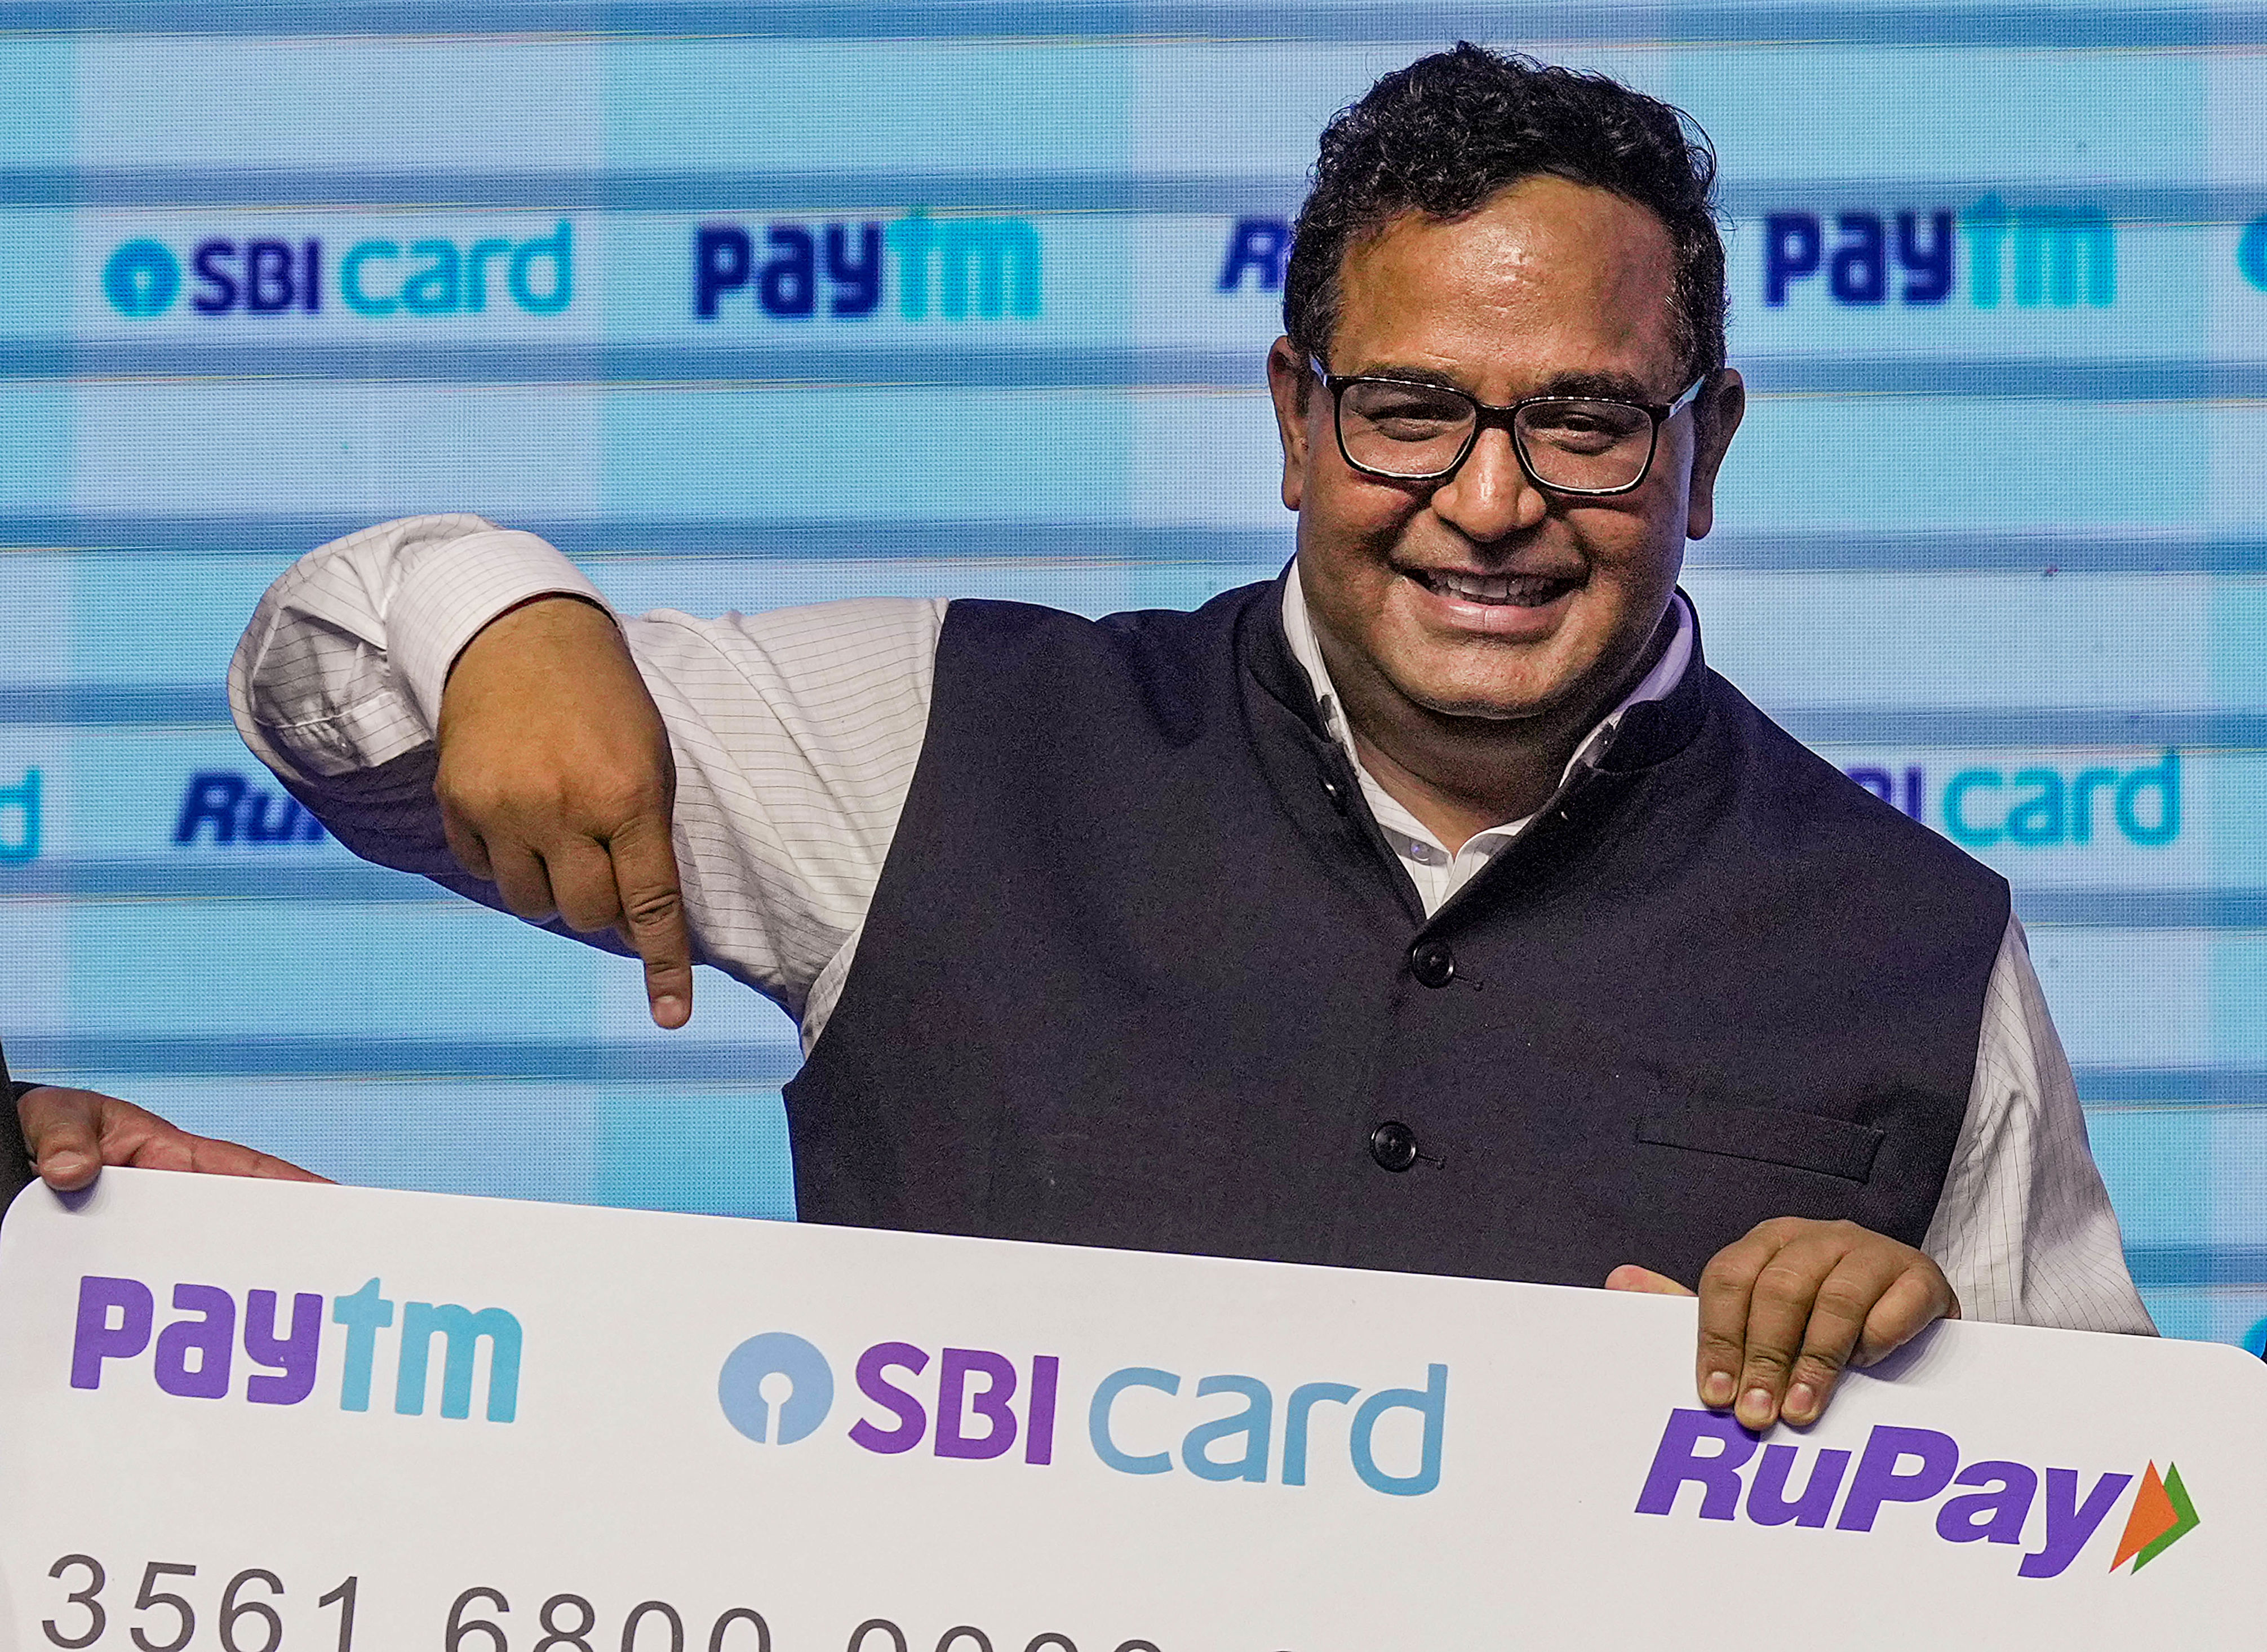 paytm shares' slide show continues, hit lower circuit for third day